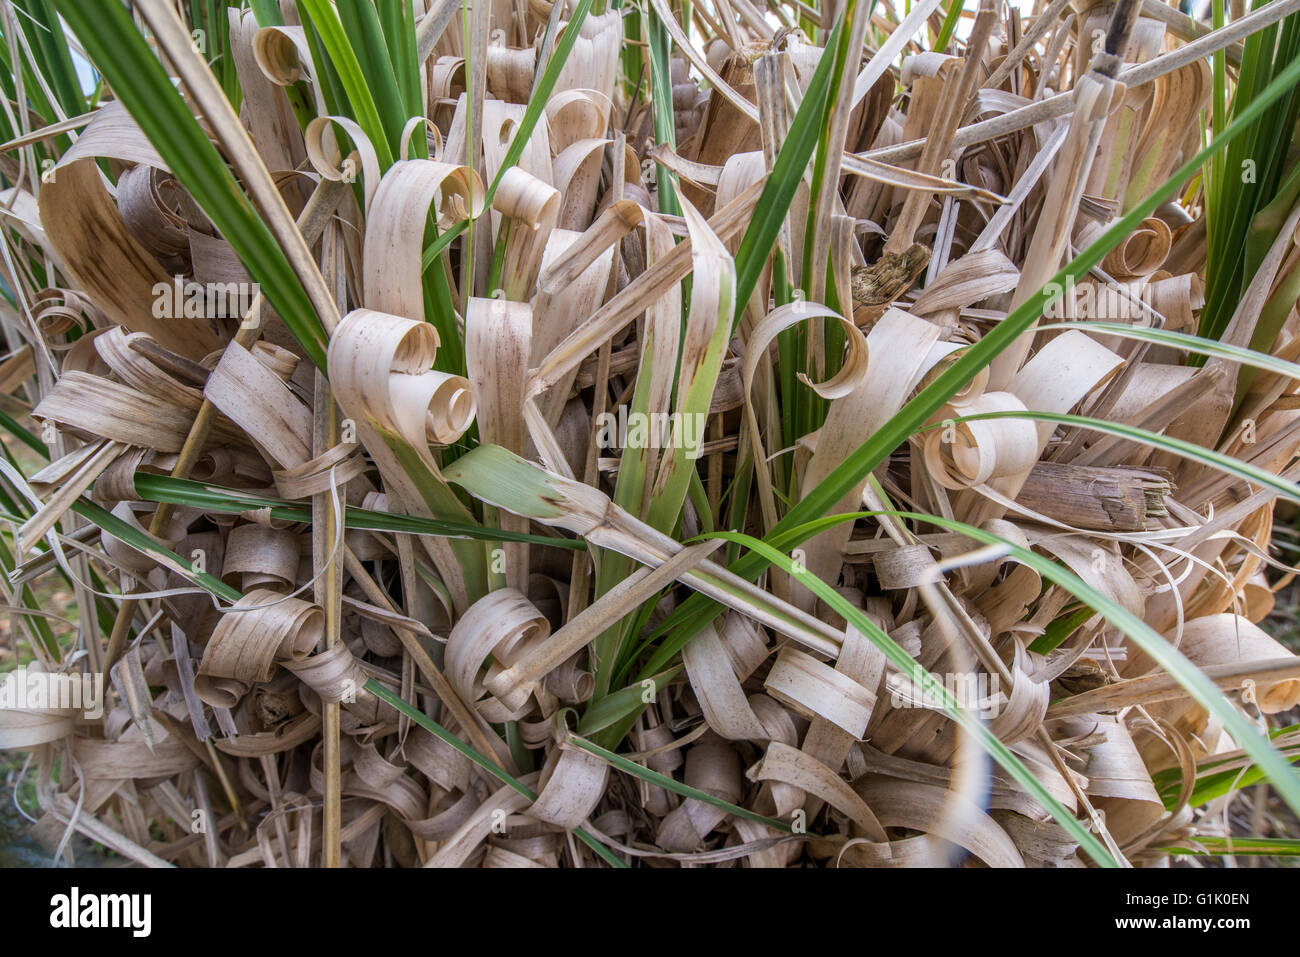 Close up of curled dry grass at base of plant Stock Photo